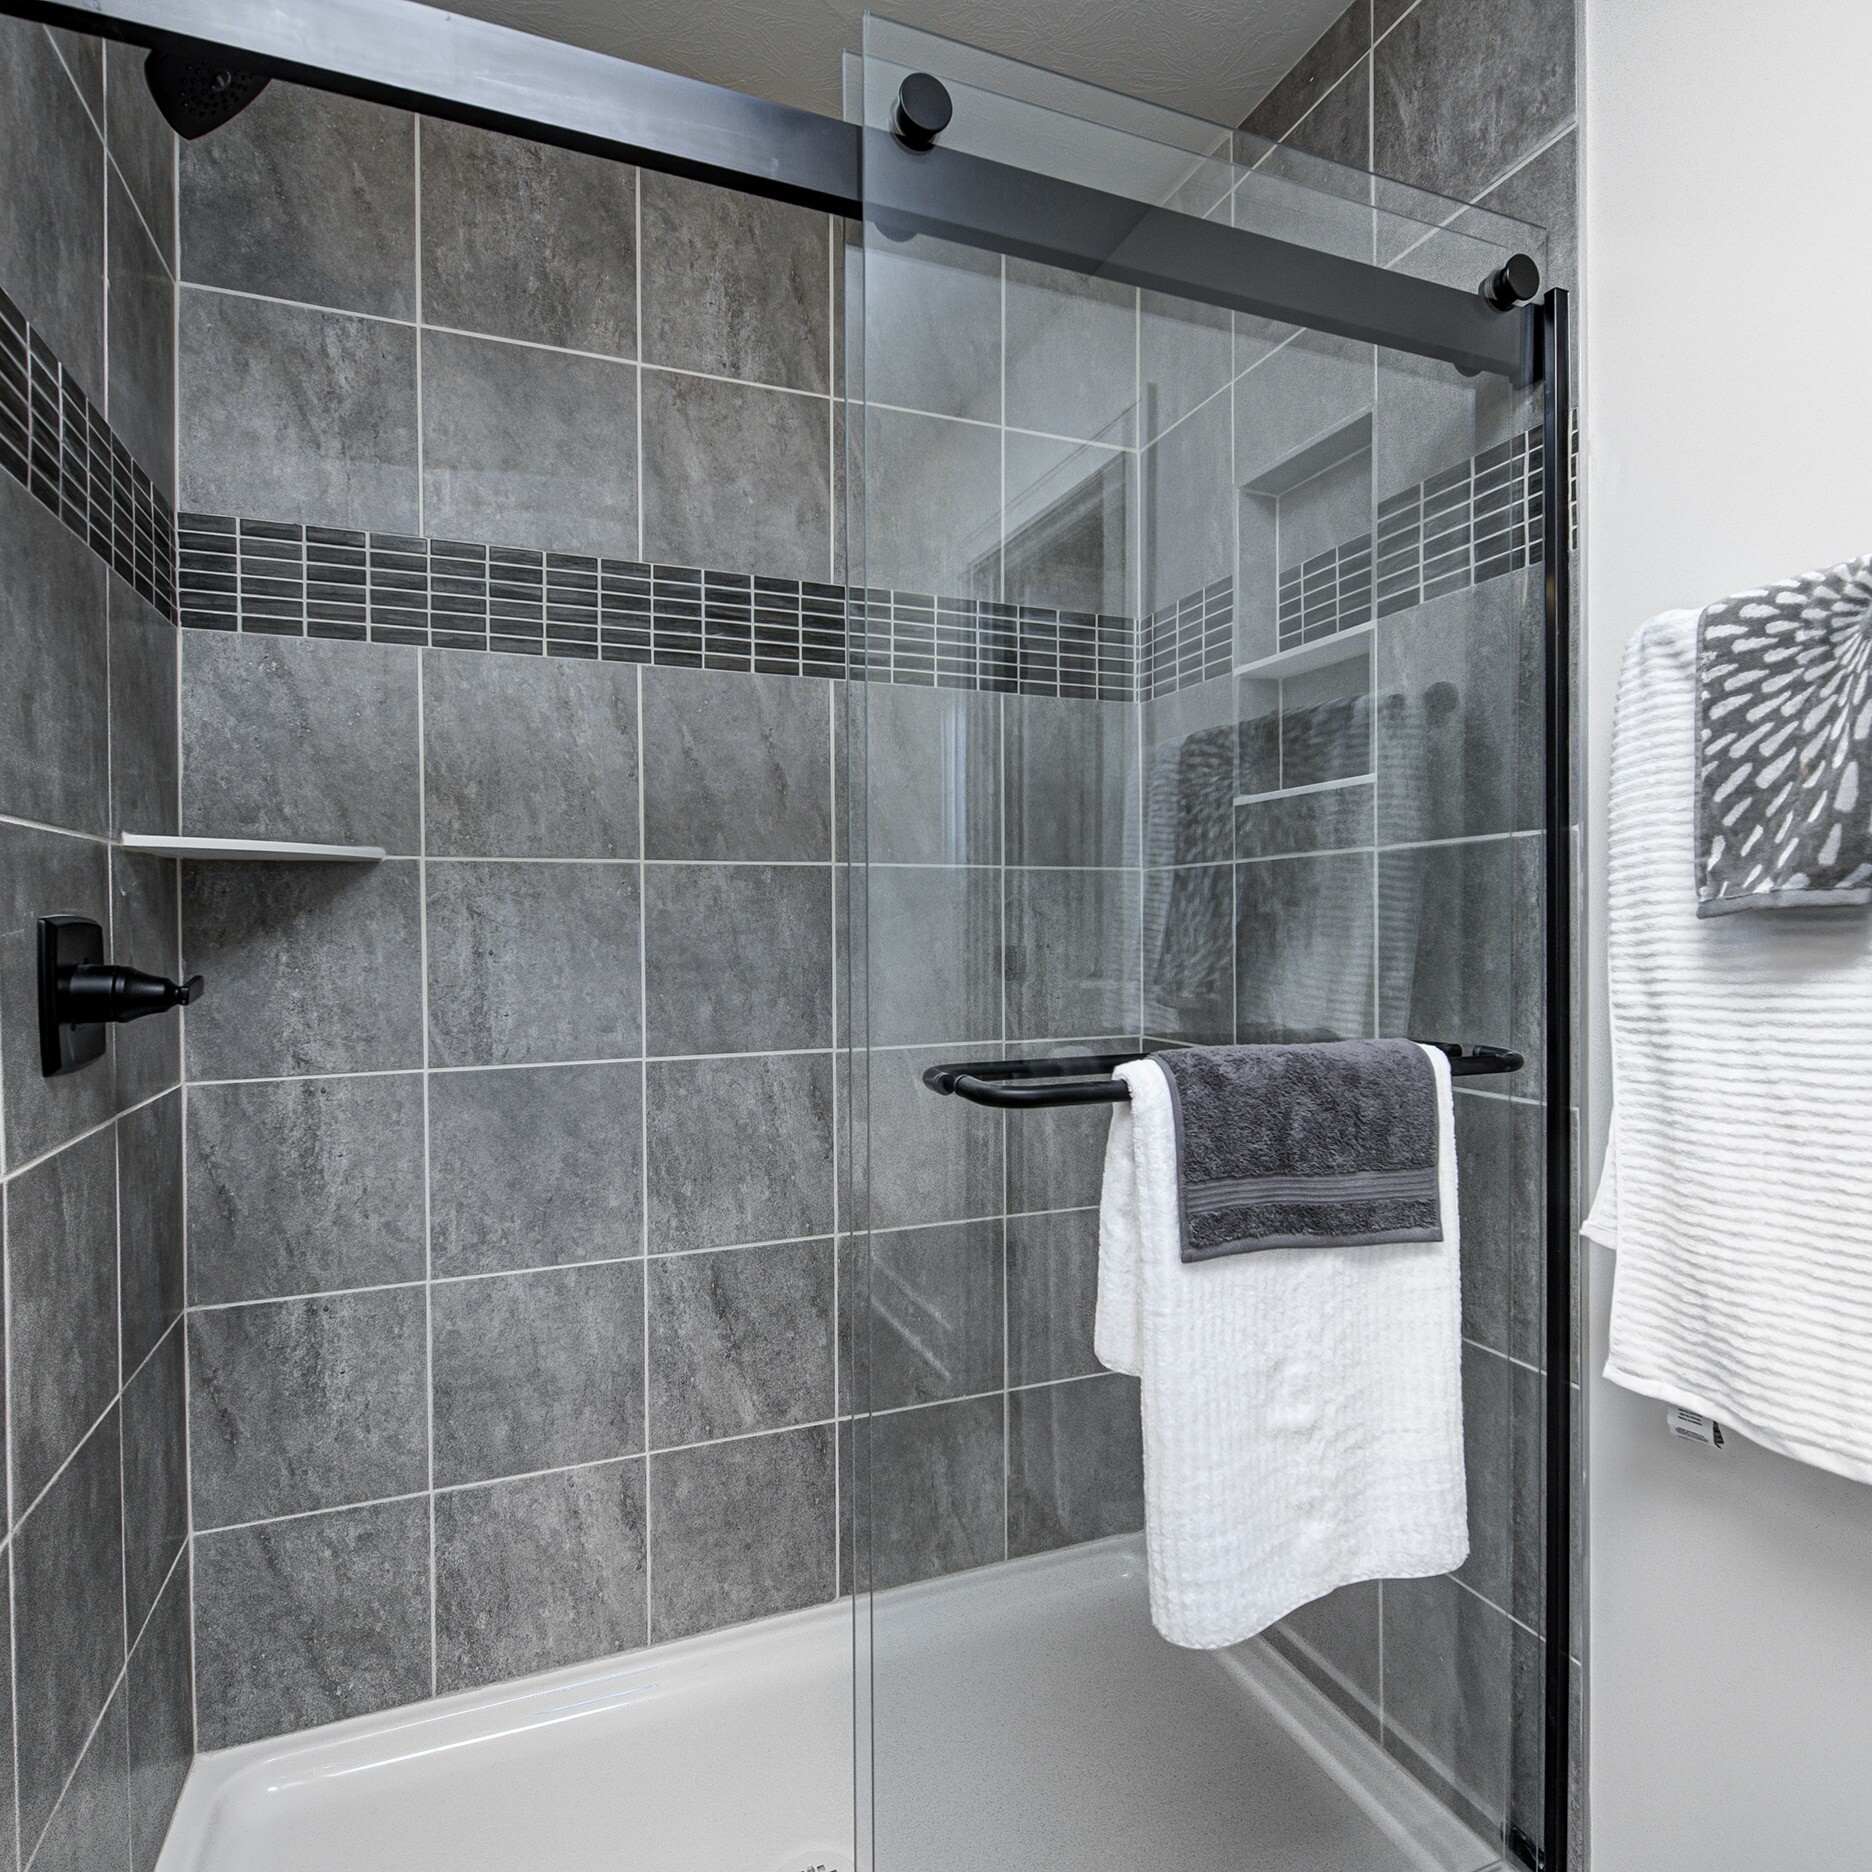 A bathroom with a glass shower door and towel rack.